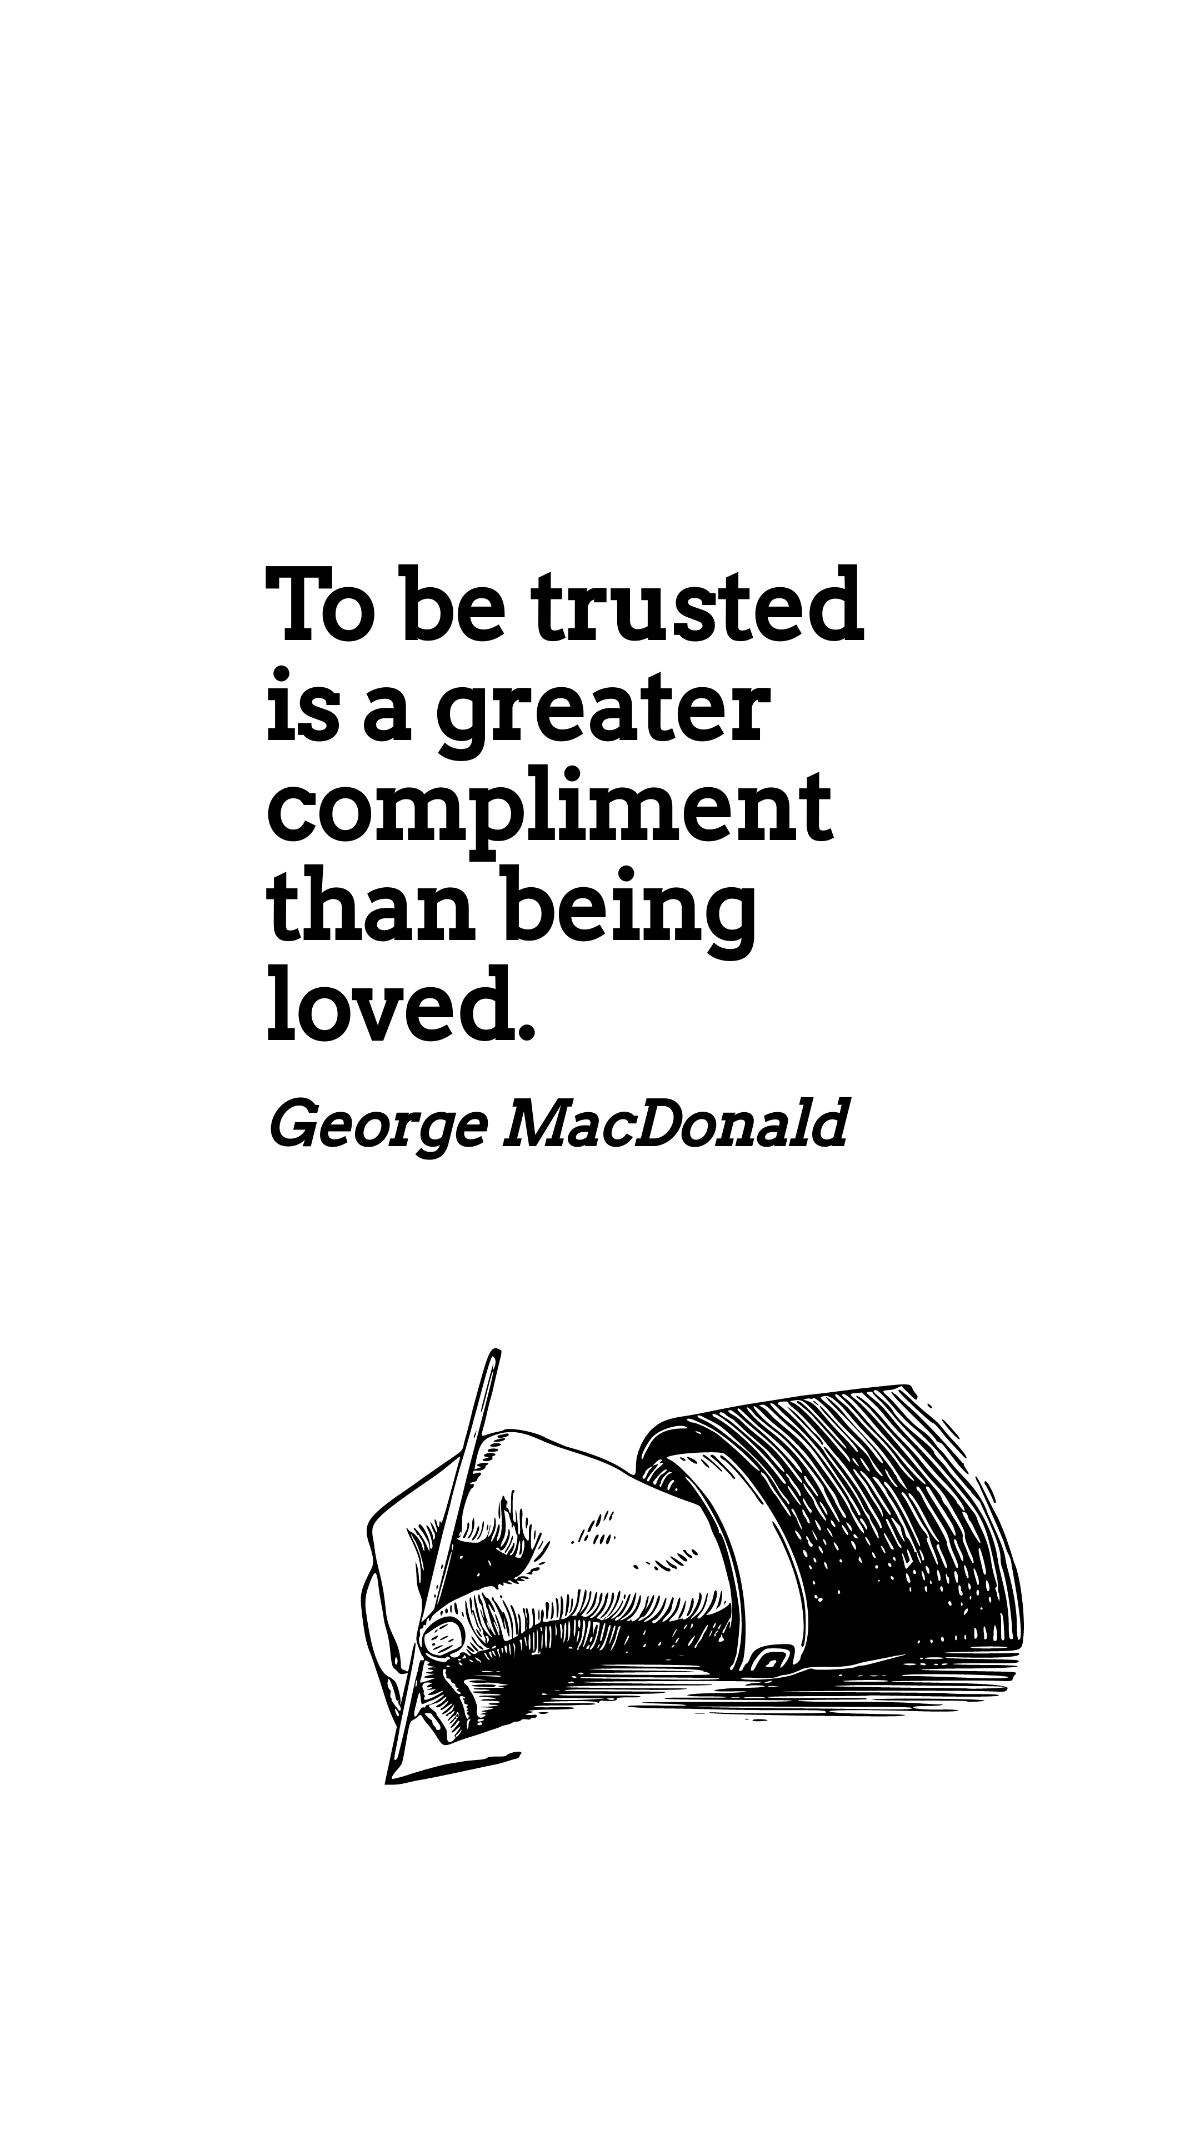 George MacDonald - To be trusted is a greater compliment than being loved.